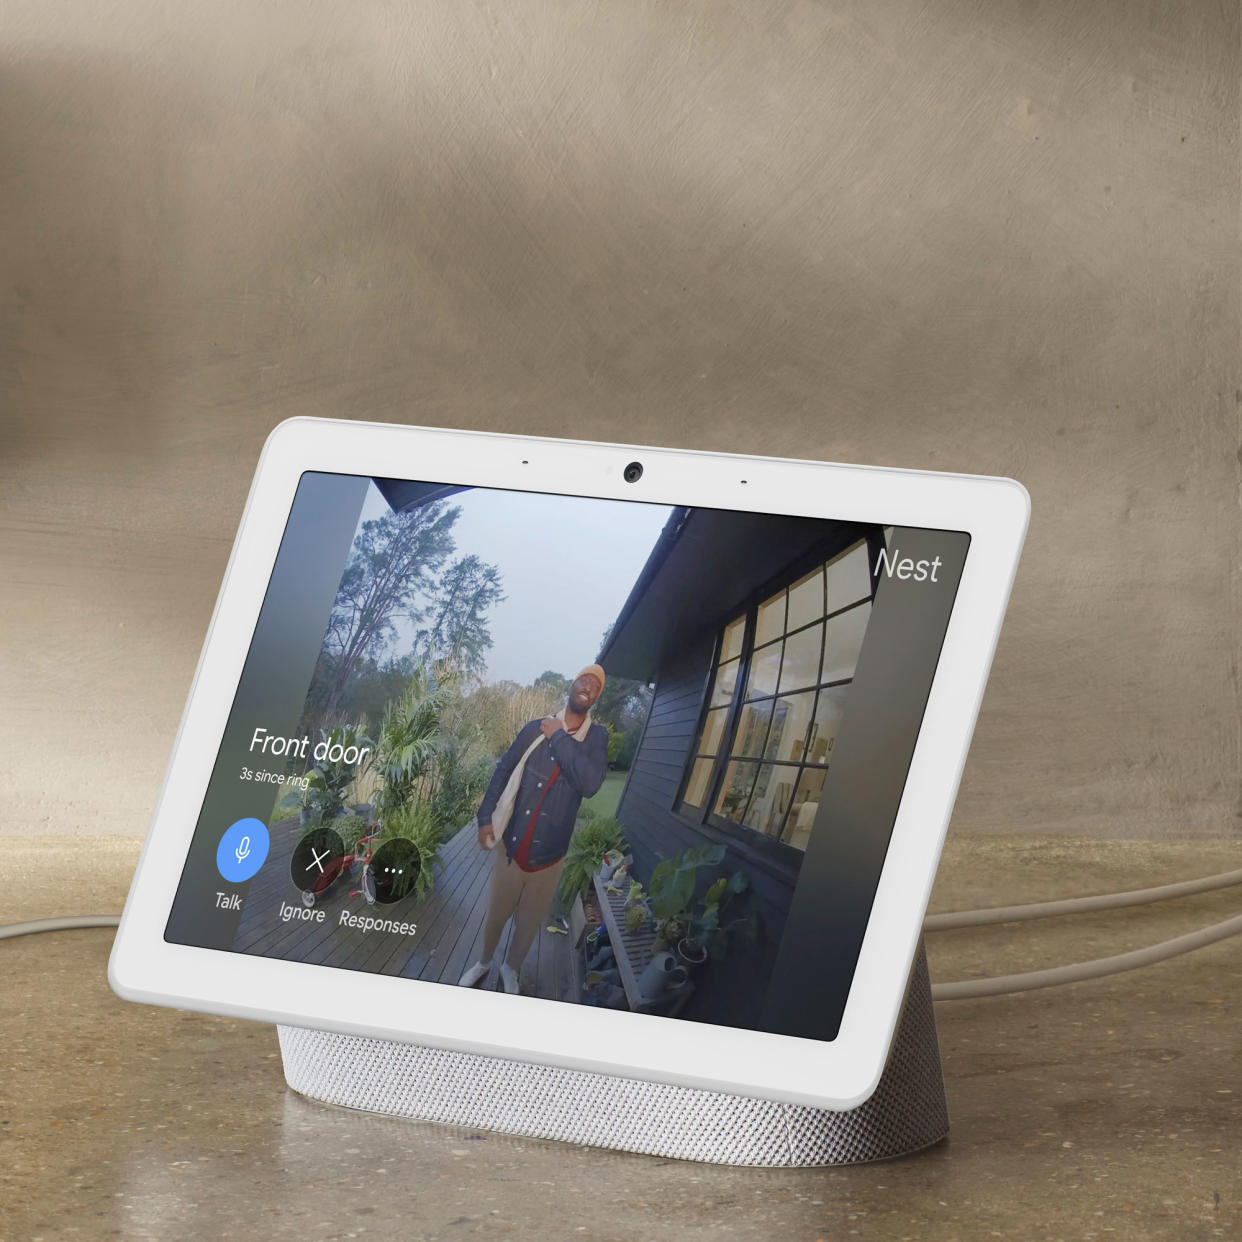  A Google smart hub speaker showing the view from the front door via a video doorbell for smart home security. 